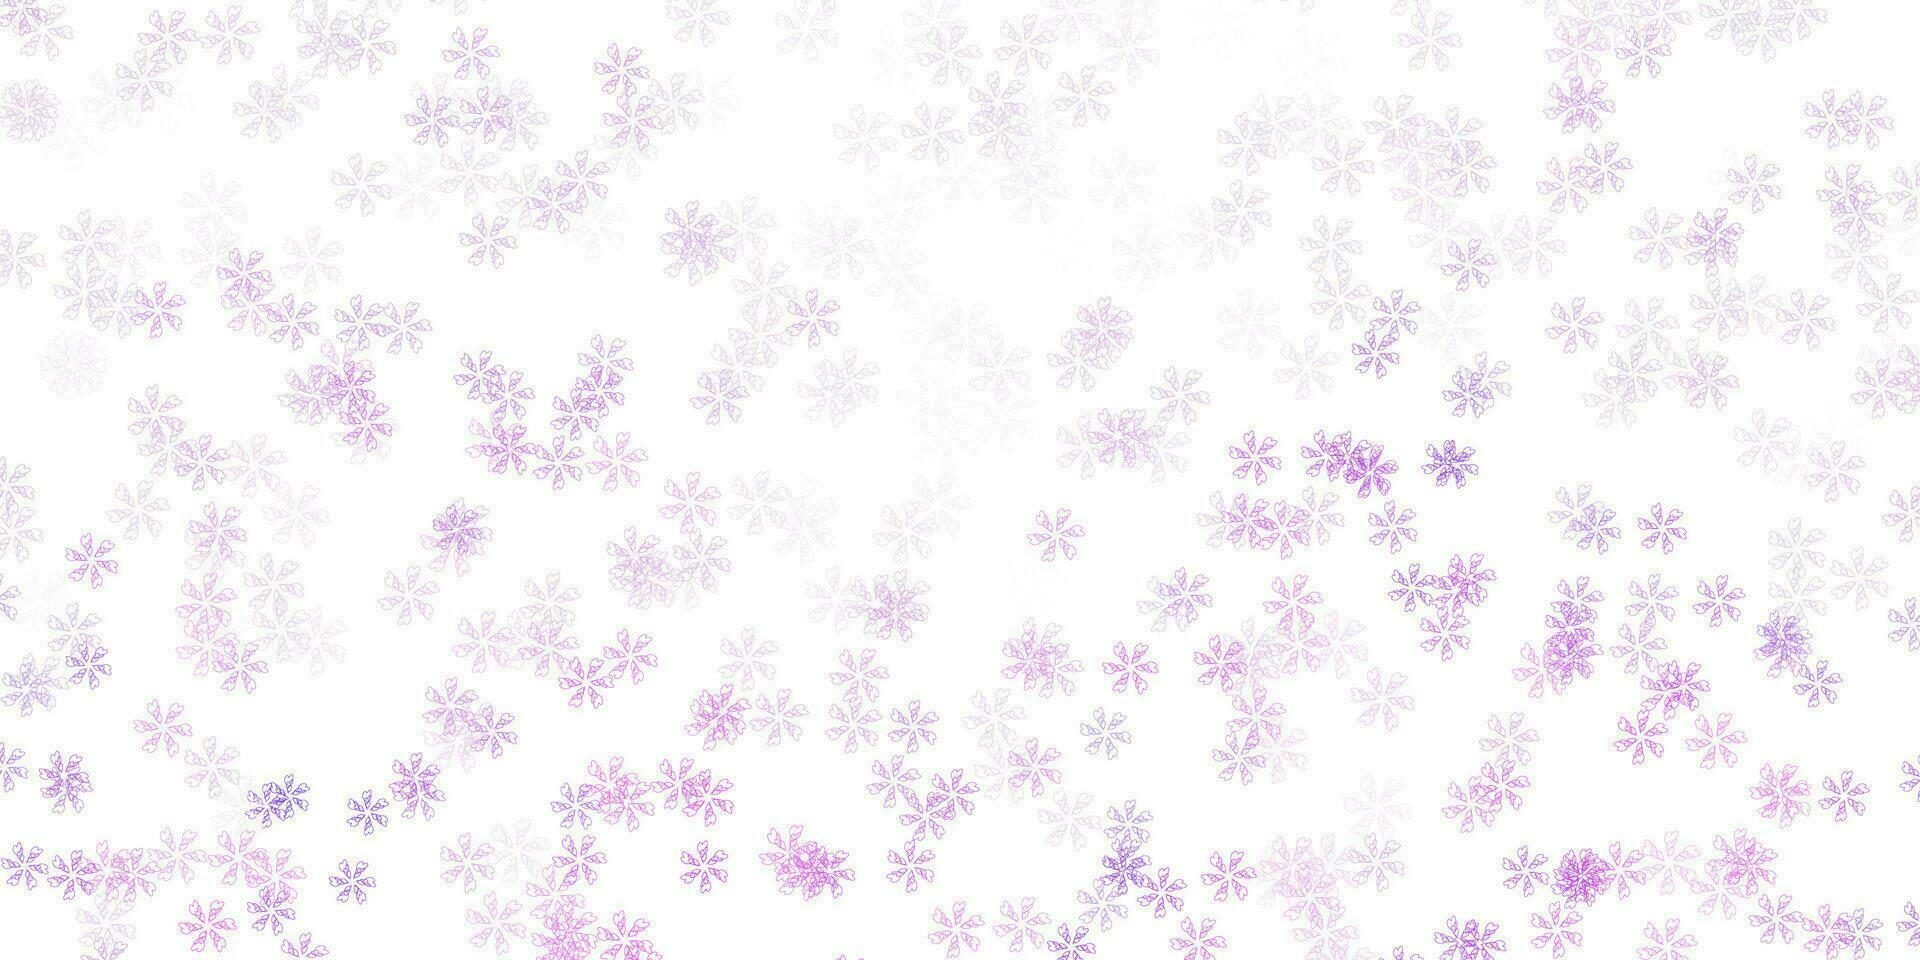 Light purple vector abstract background with leaves.